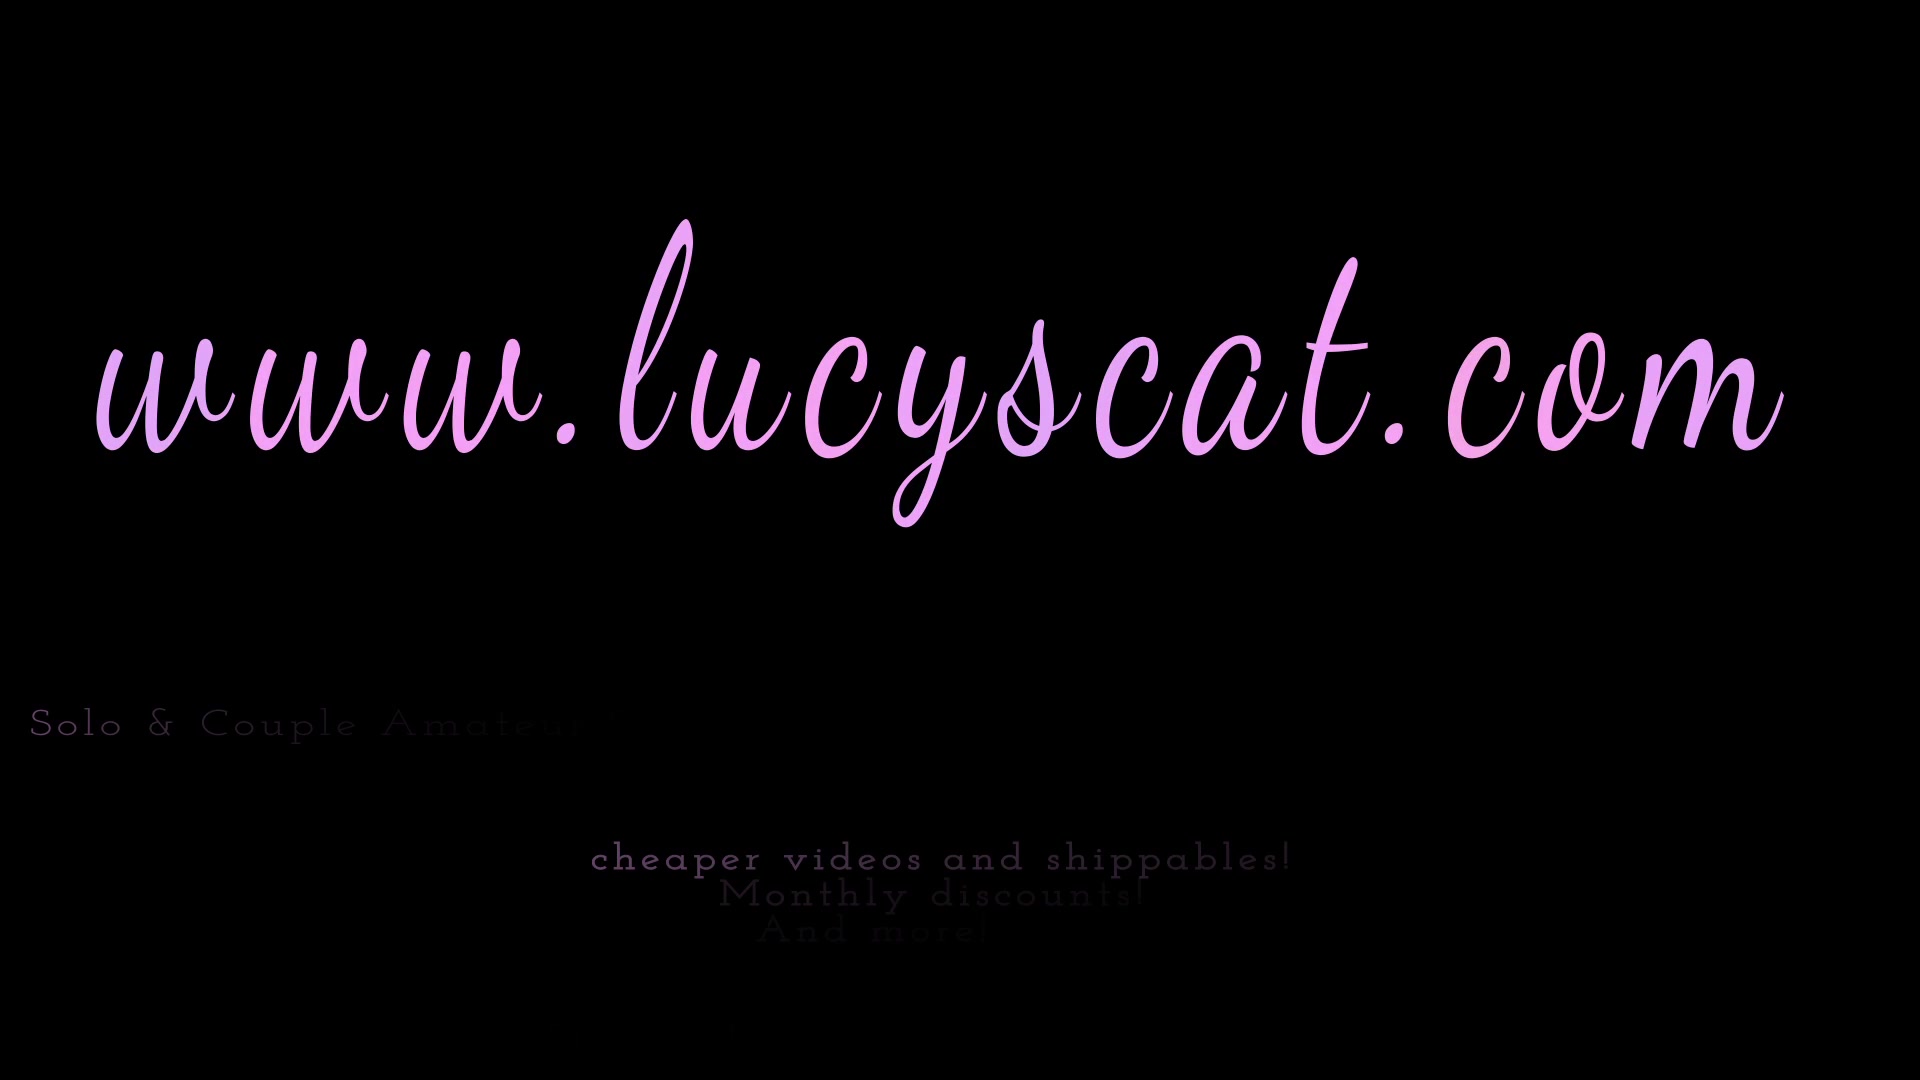 Click to play video Lucy scat compilation